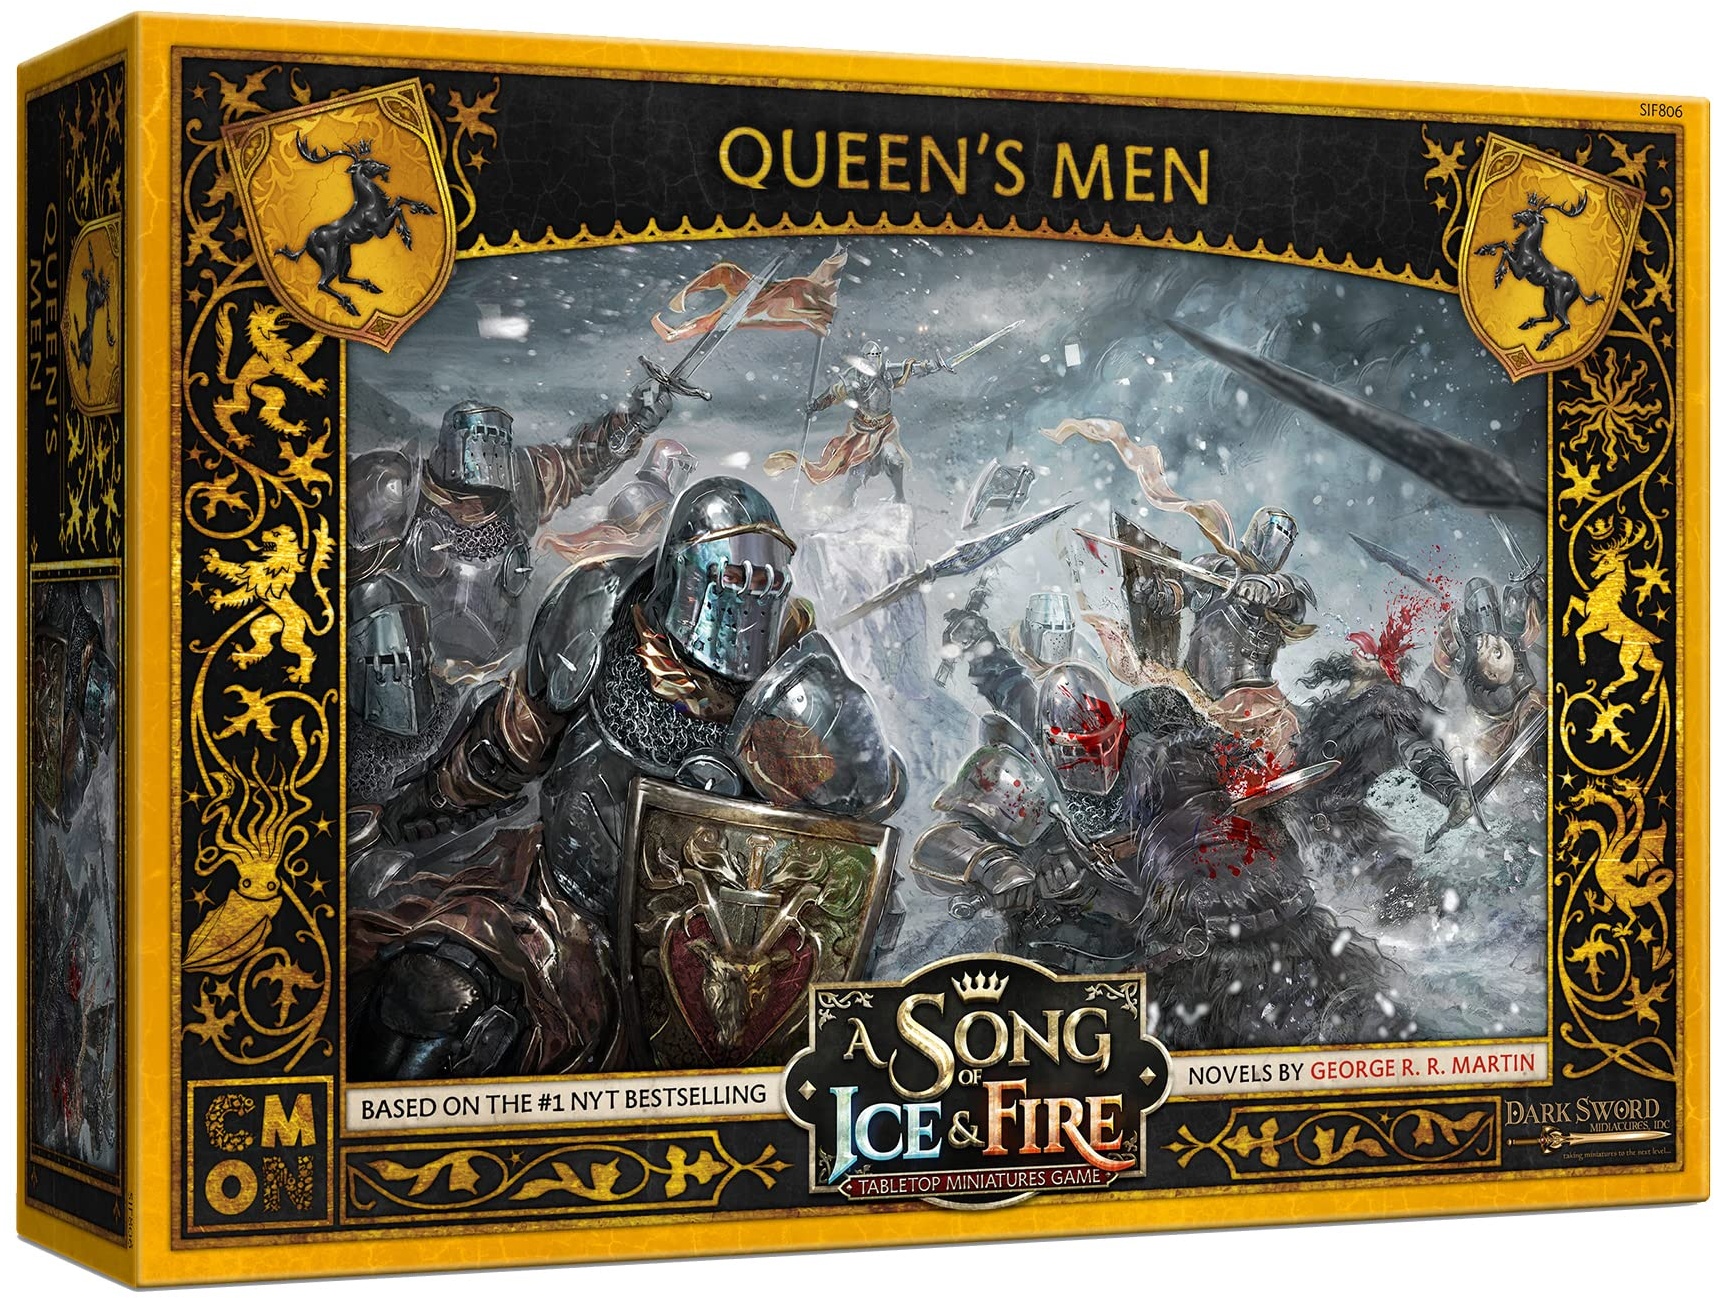 CMON A Song of Ice and Fire Tabletop Miniatures Game – Baratheon Queen's Men Expansion Set, Strategy Game for Teens and Adults, Ages 14 and up, 2+ Players, Average Playtime 45-60 Minutes, Made by